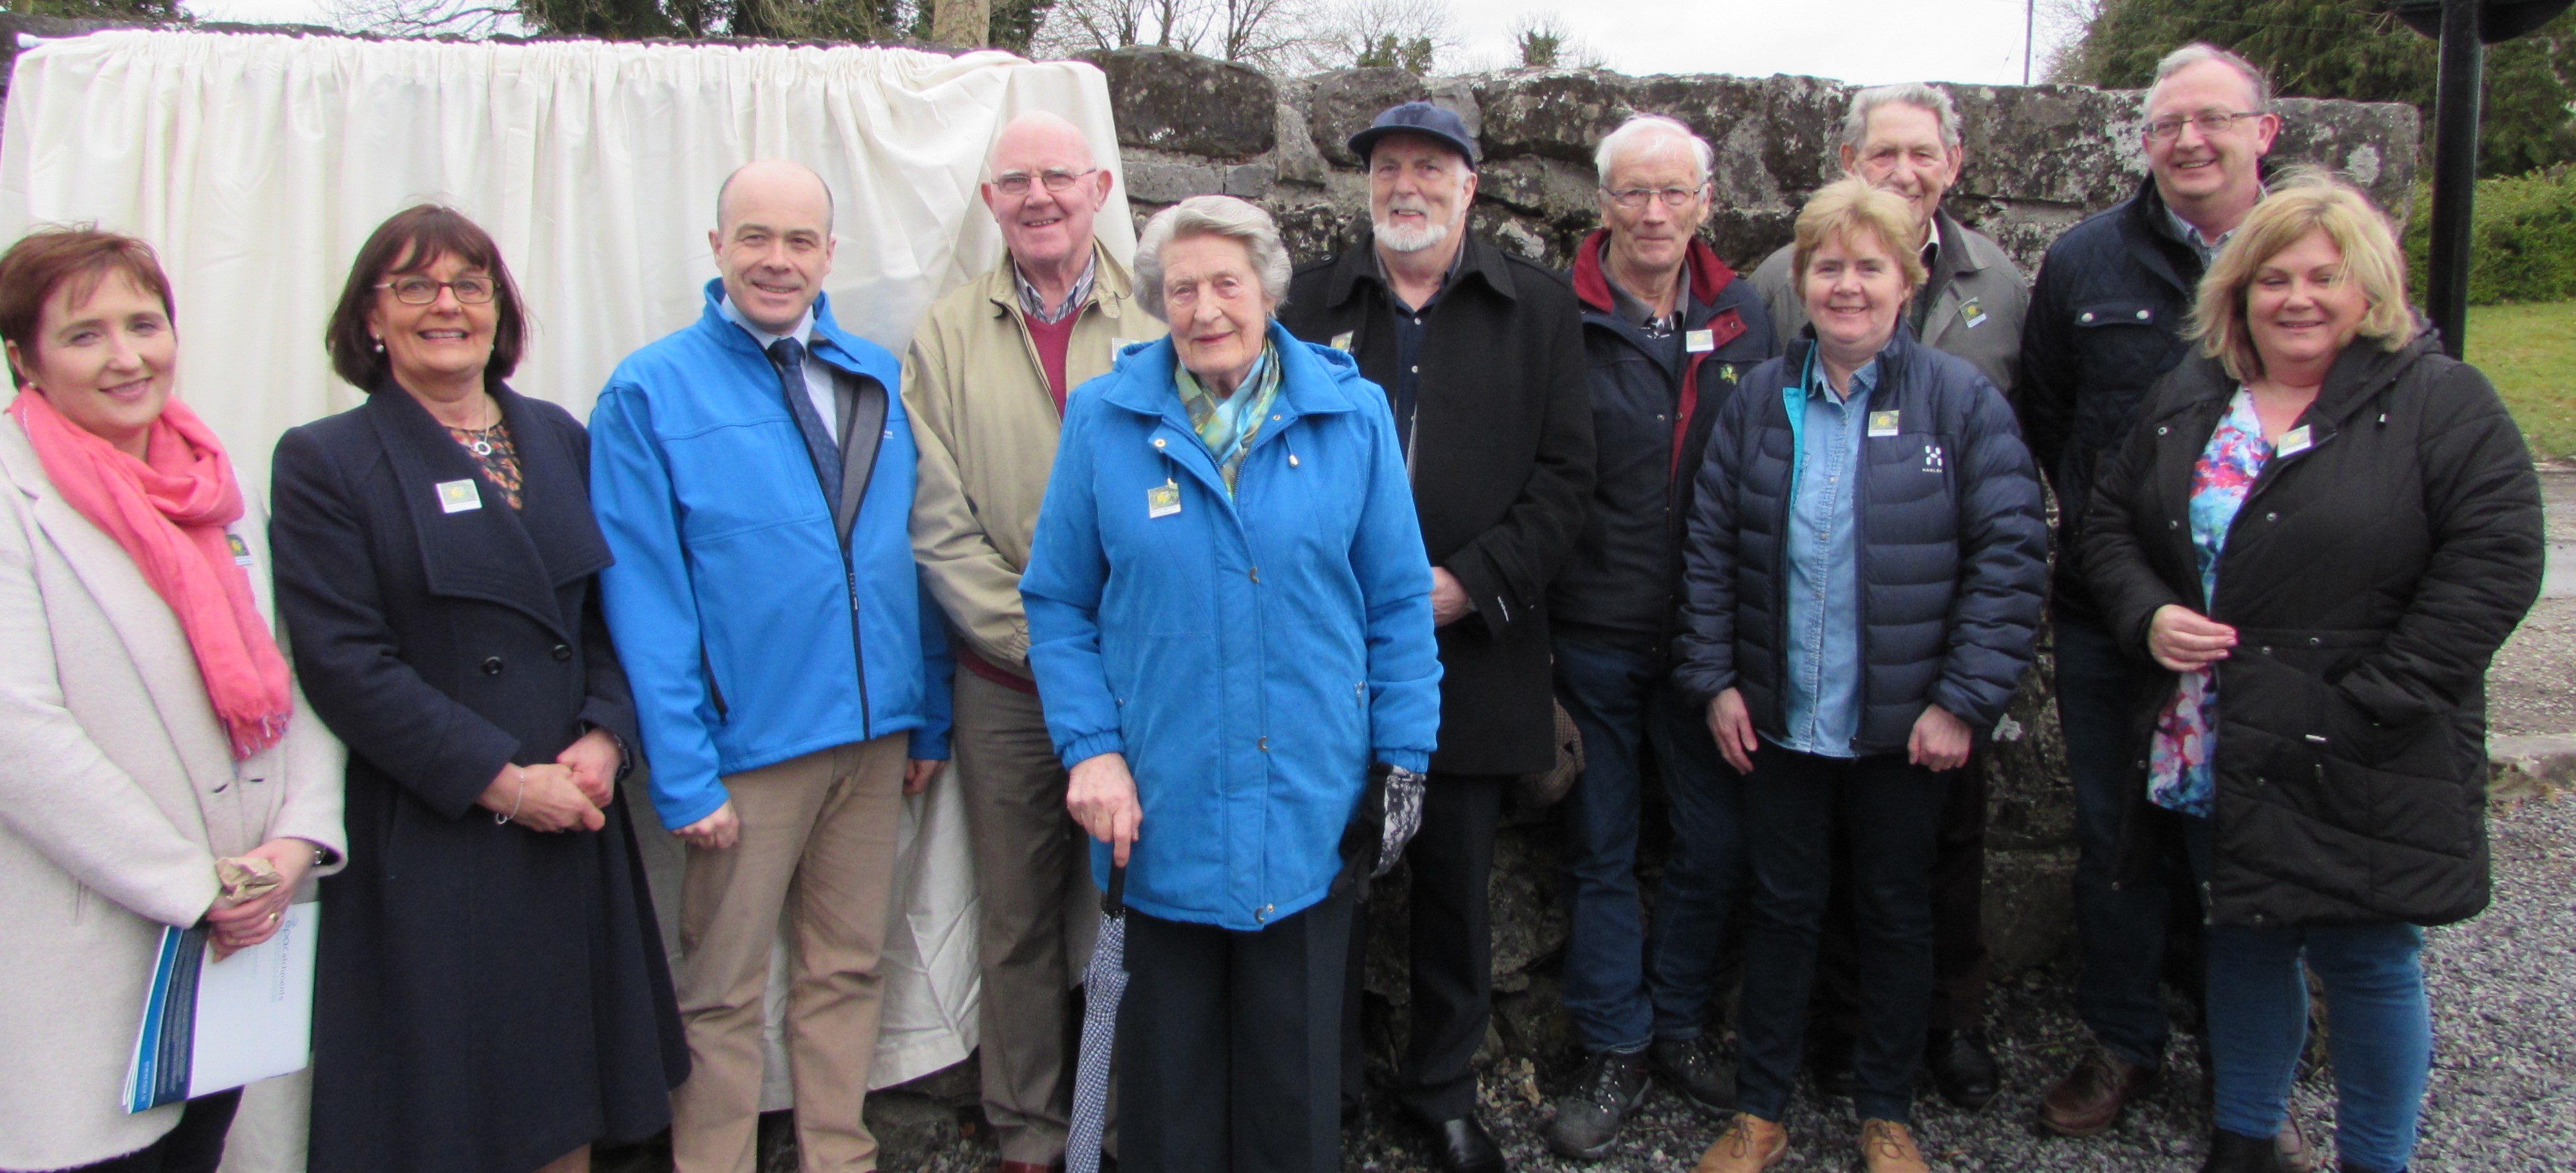 Kilteevan Tidy Towns Committee with Minister Naughton: Marguerite Croghan, Eileen Fahey, Denis Naughton, Minister for Communications Climate Acton and Environment, Joe Fox, Gertie Murphy Ray Clabby, Barney Donlon, Lena Coyle, Mattie Murphy, Hugh Brennan, Fiona Coen.